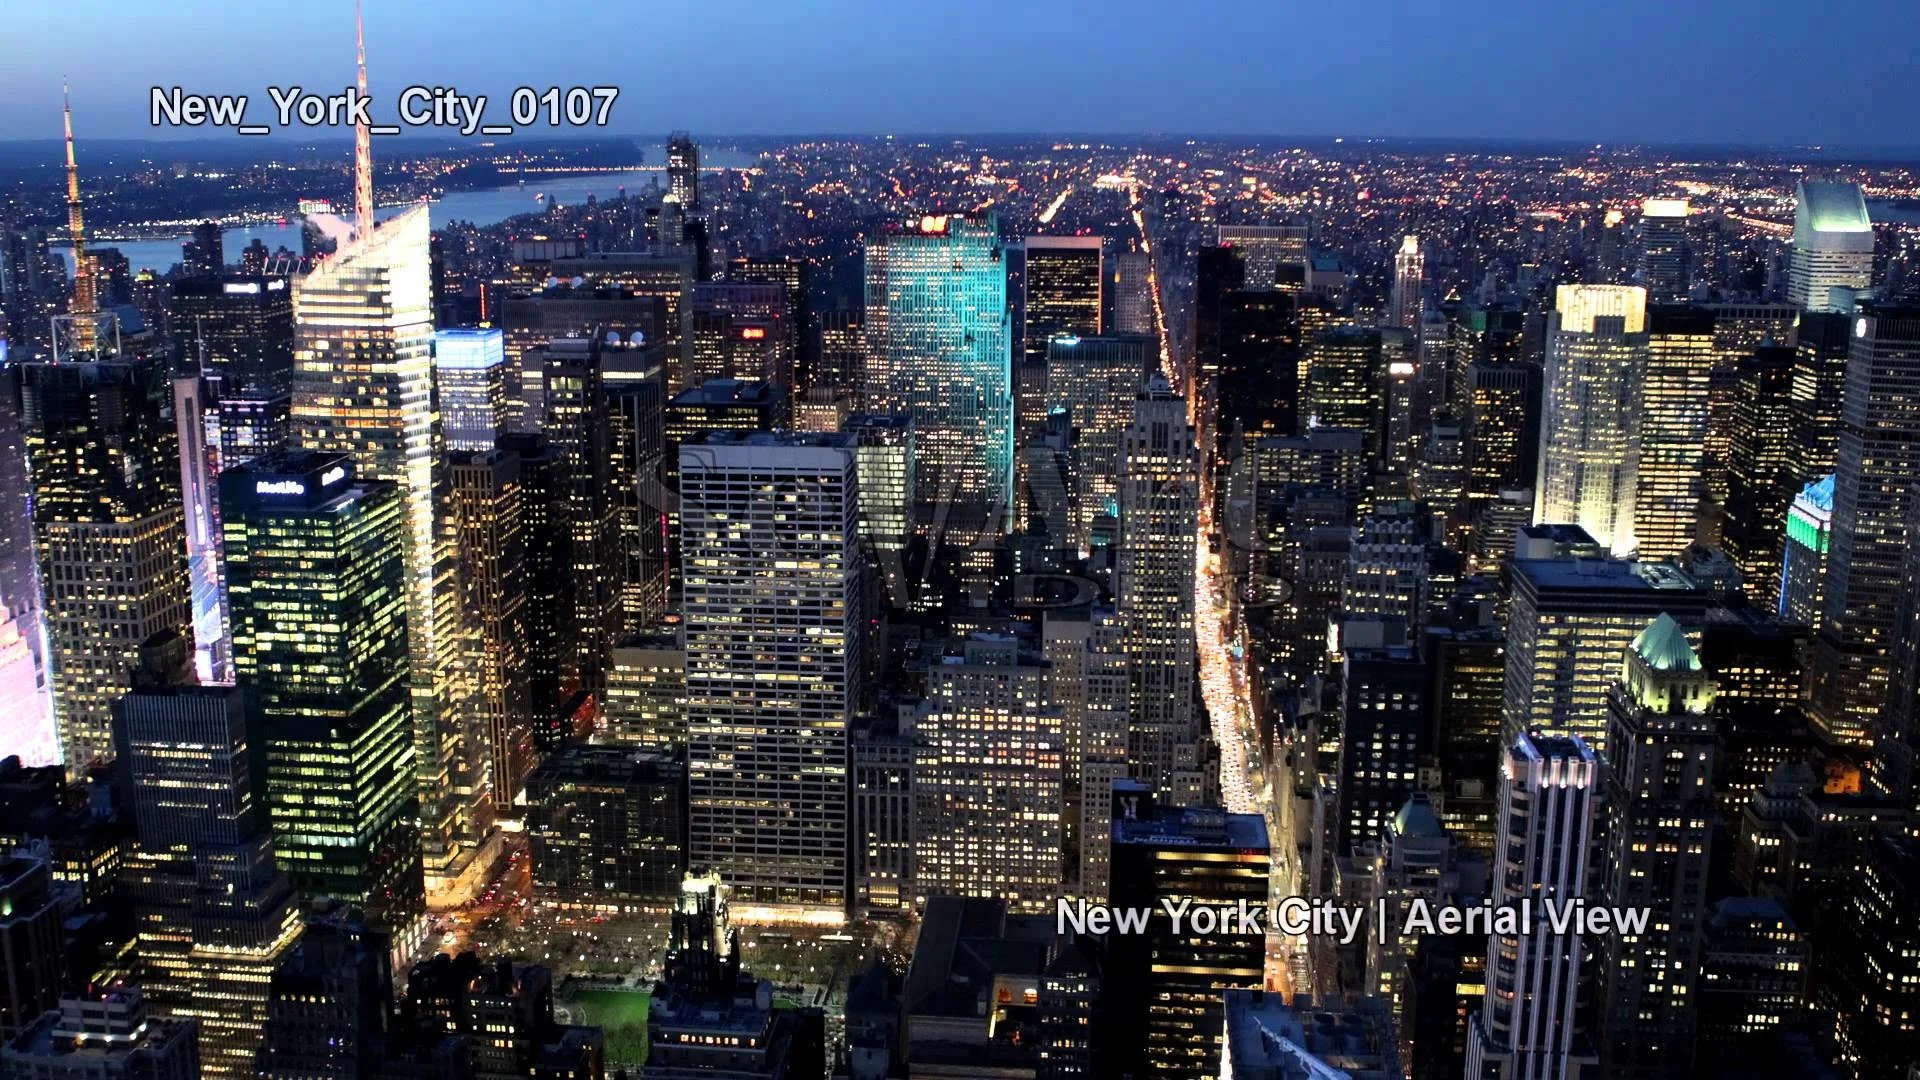 UHD Ultra HD 4K Video Stock Footage New York City Aerial View Skyline  Cityscape Day Night Towers